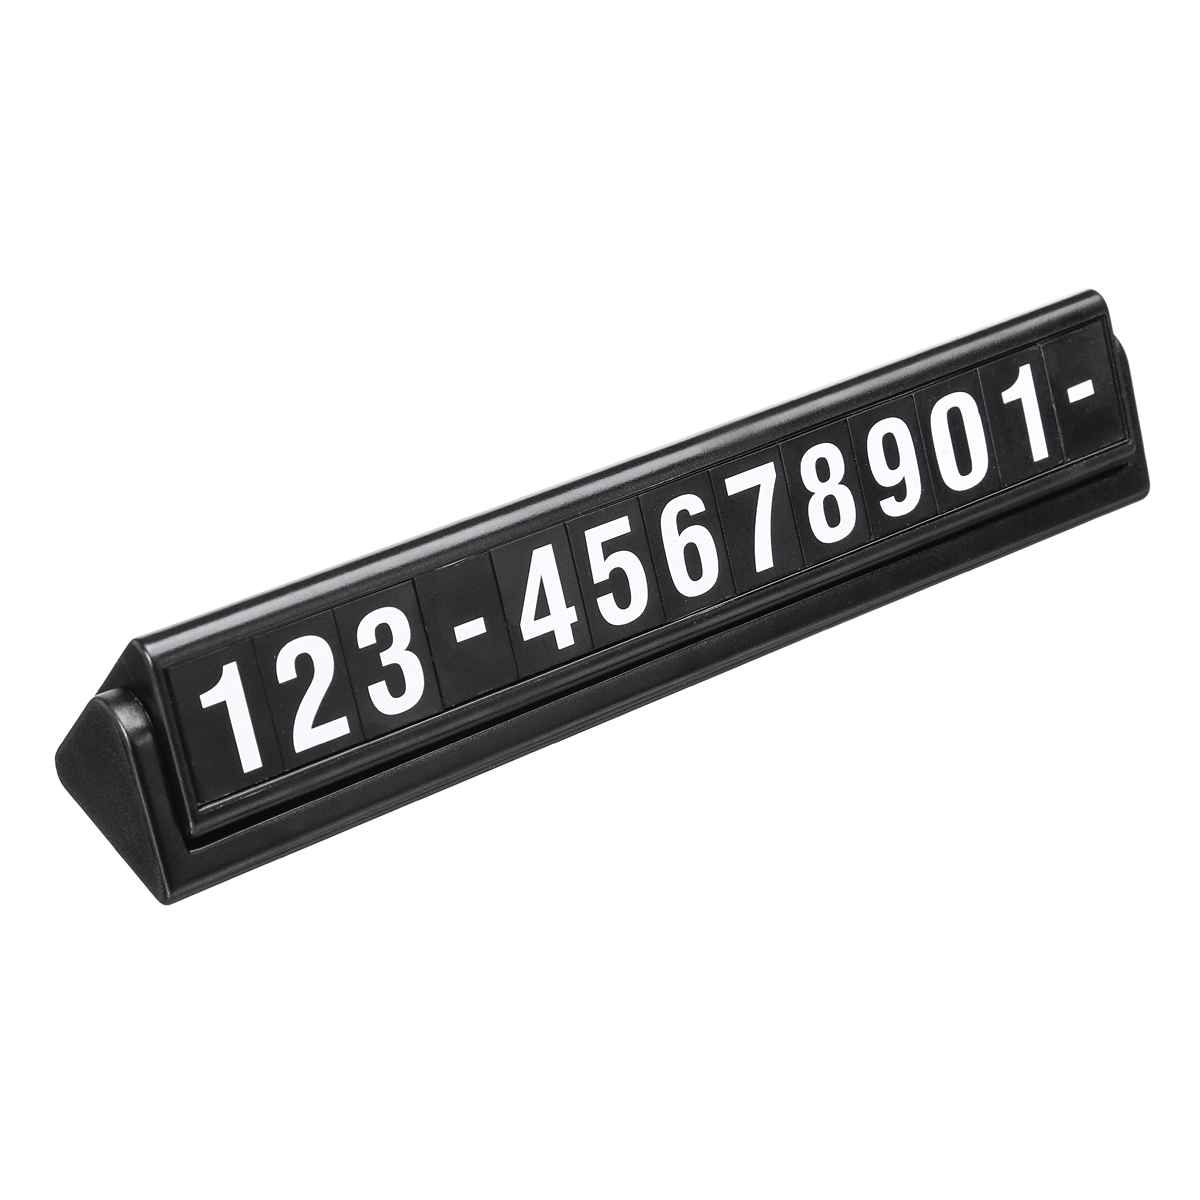 

Universal Car License Plate Frame Phone Number Stop Plate StickerLuminous Temporary Parking Card Rotatable Hiding